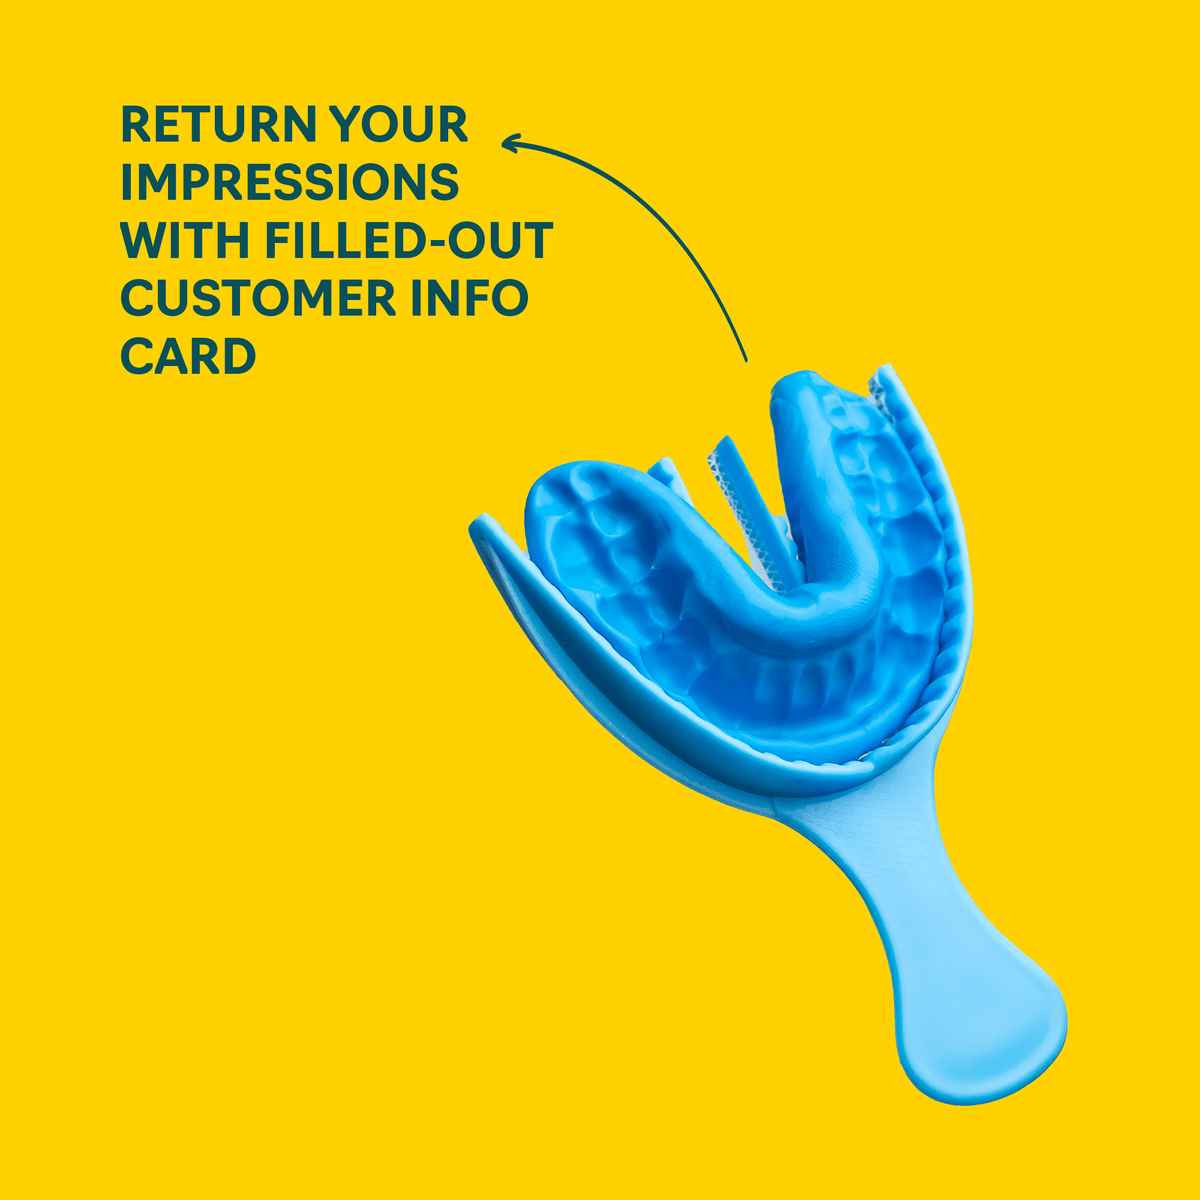 Blue dental impression tray with material on a Rush Lab Service night guard yellow background, featuring text about returning a completed customer information card.